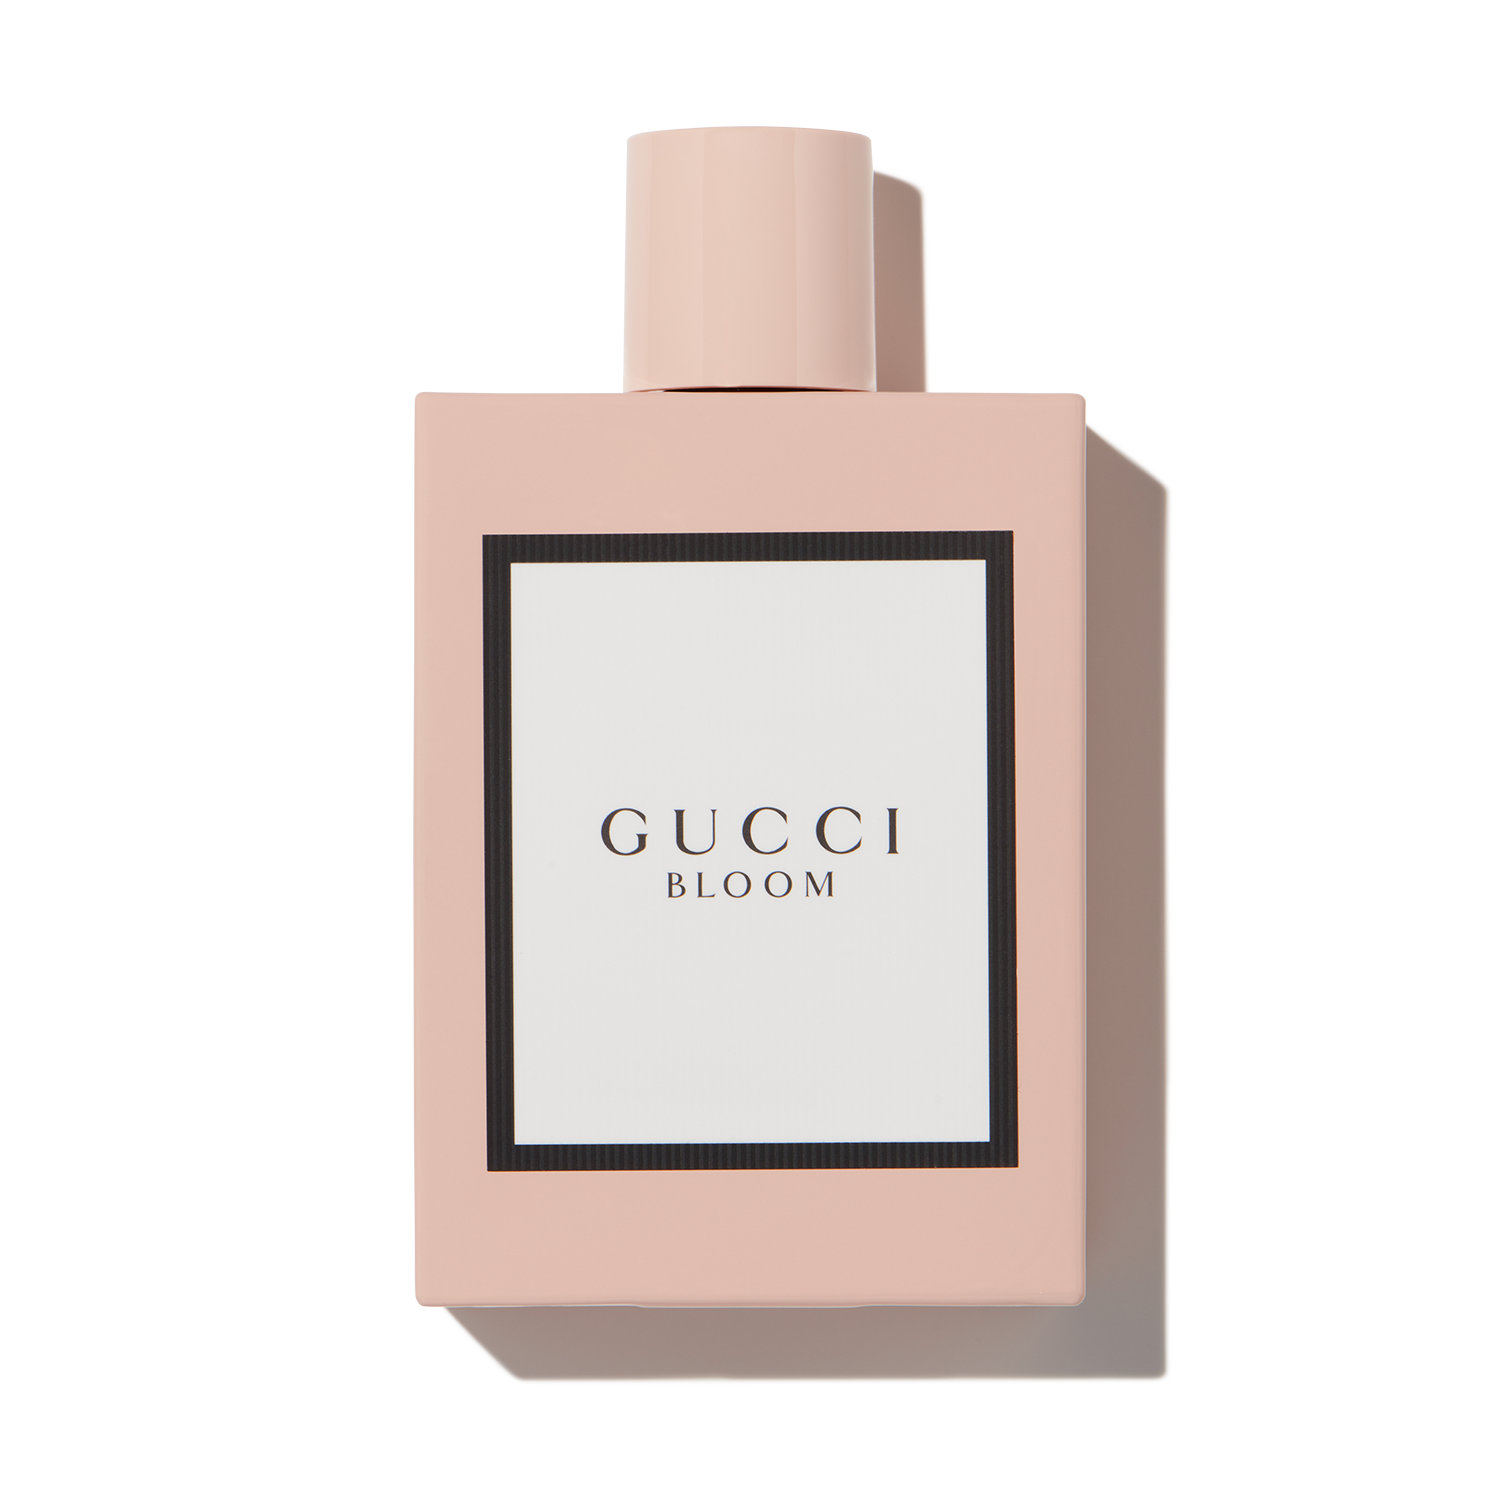 Which Gucci Bloom fragrance is perfect for you? Find out here